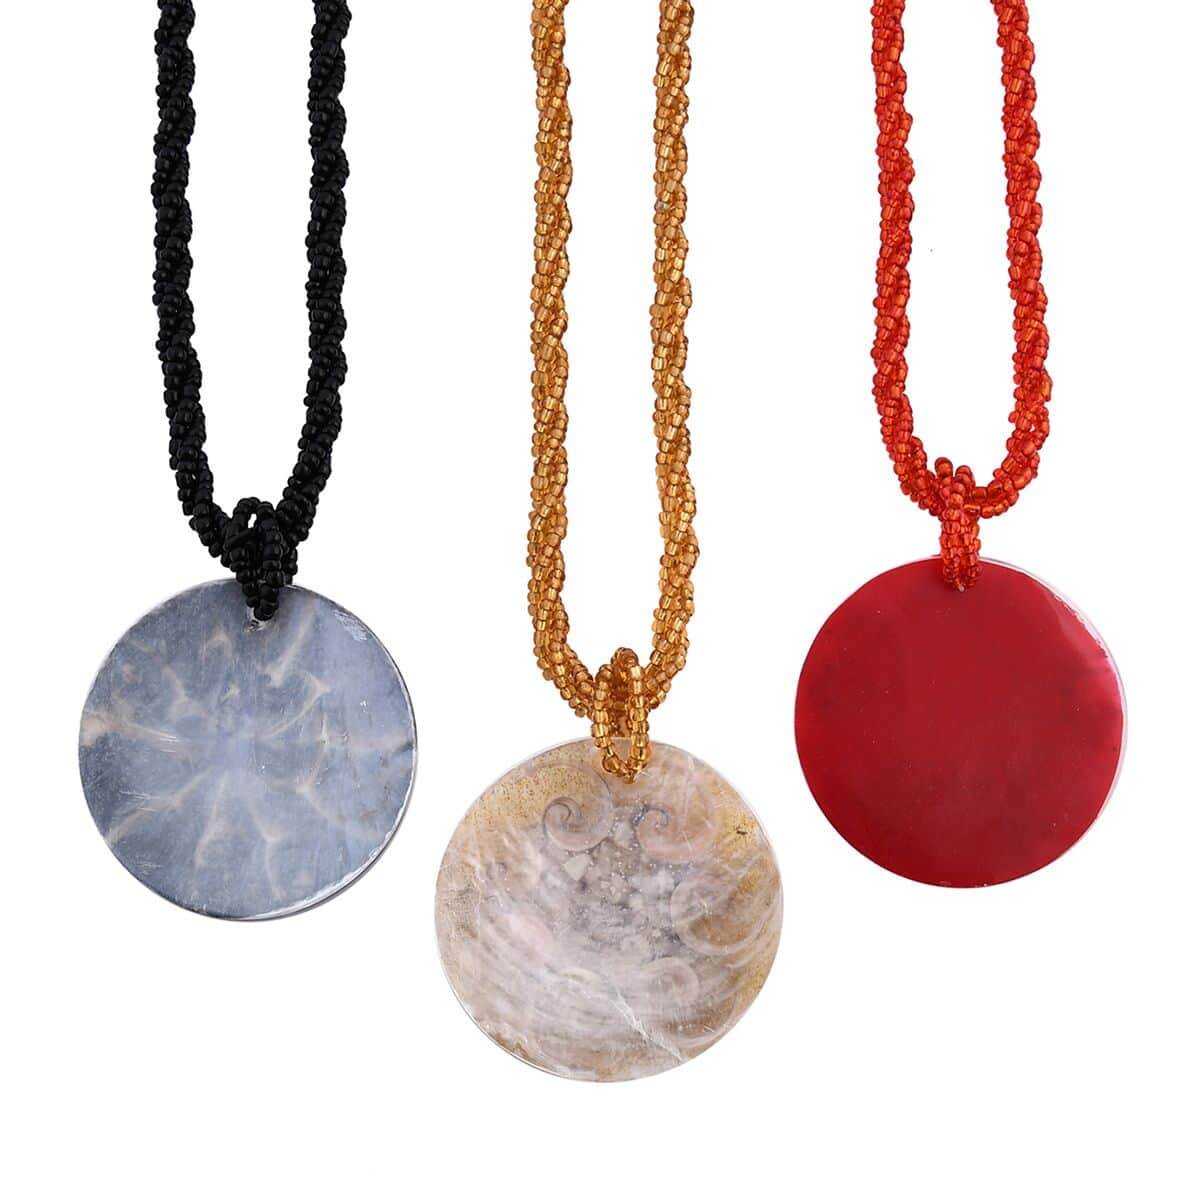 Resin Pendant Set of 3 Spider Net, Hurricane, and Star Motif With Matching Seed Beads Necklace (20 Inches) image number 3